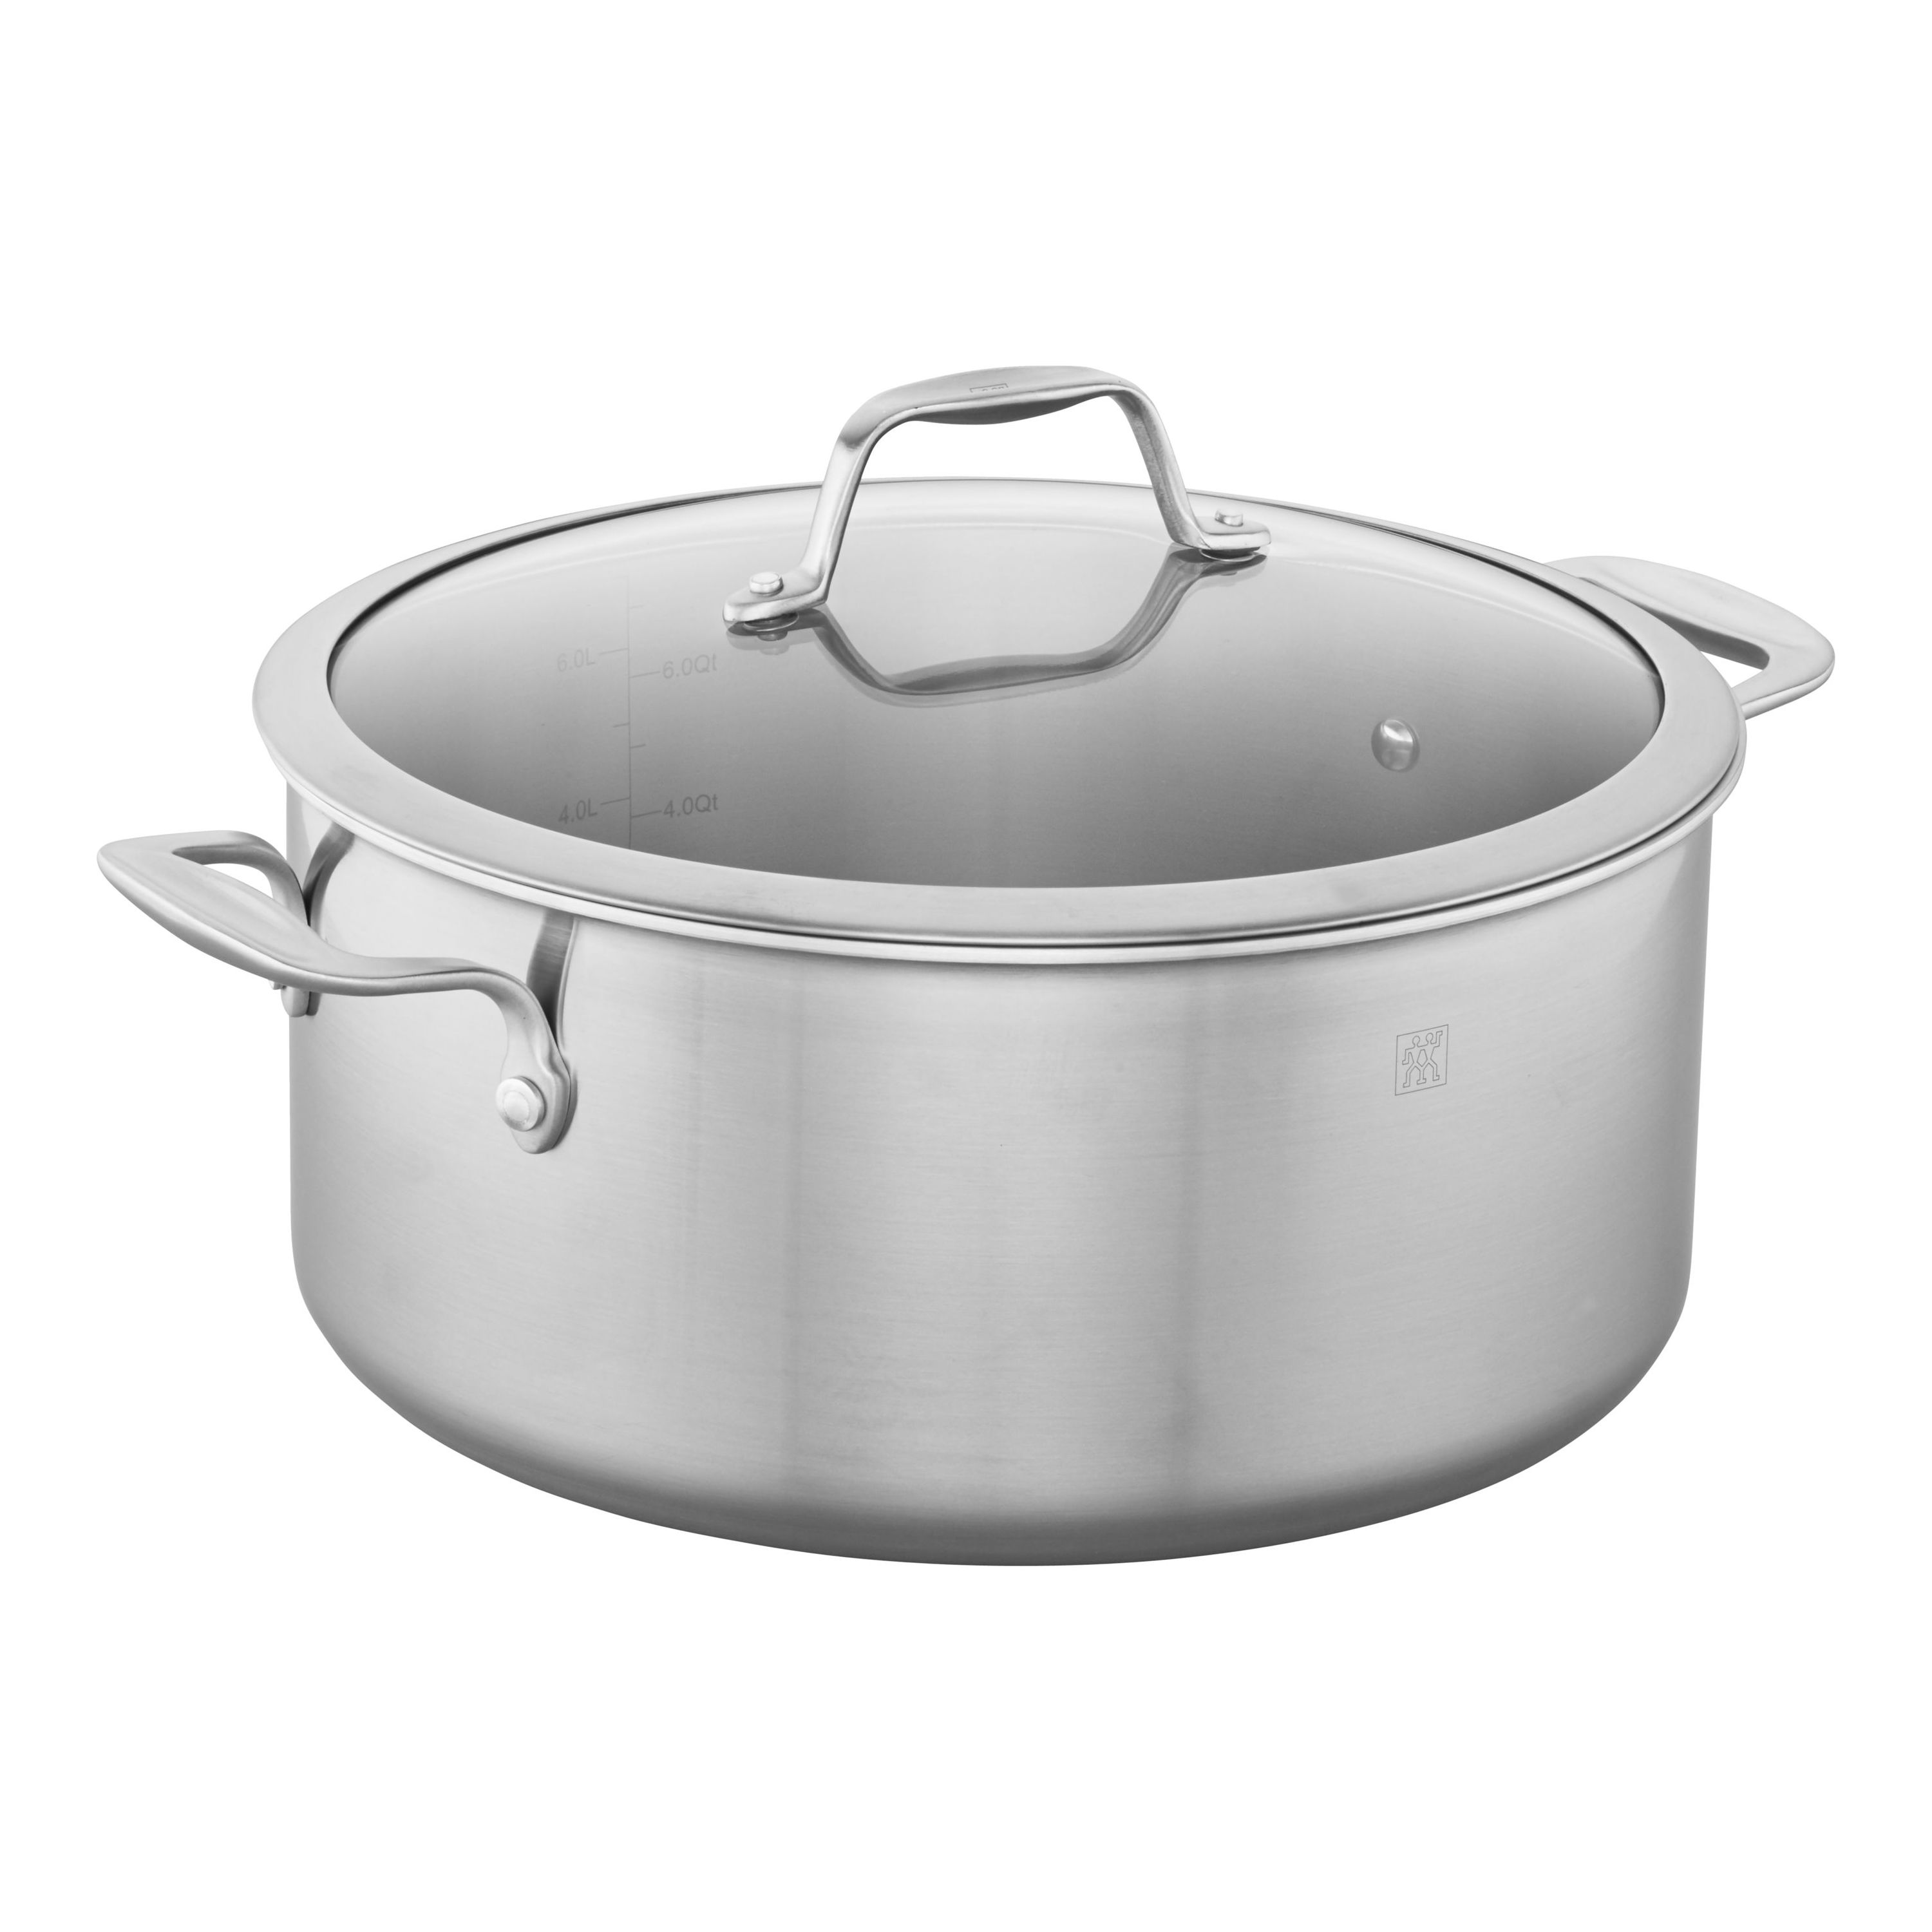 8 qt, Stainless Steel Dutch Oven